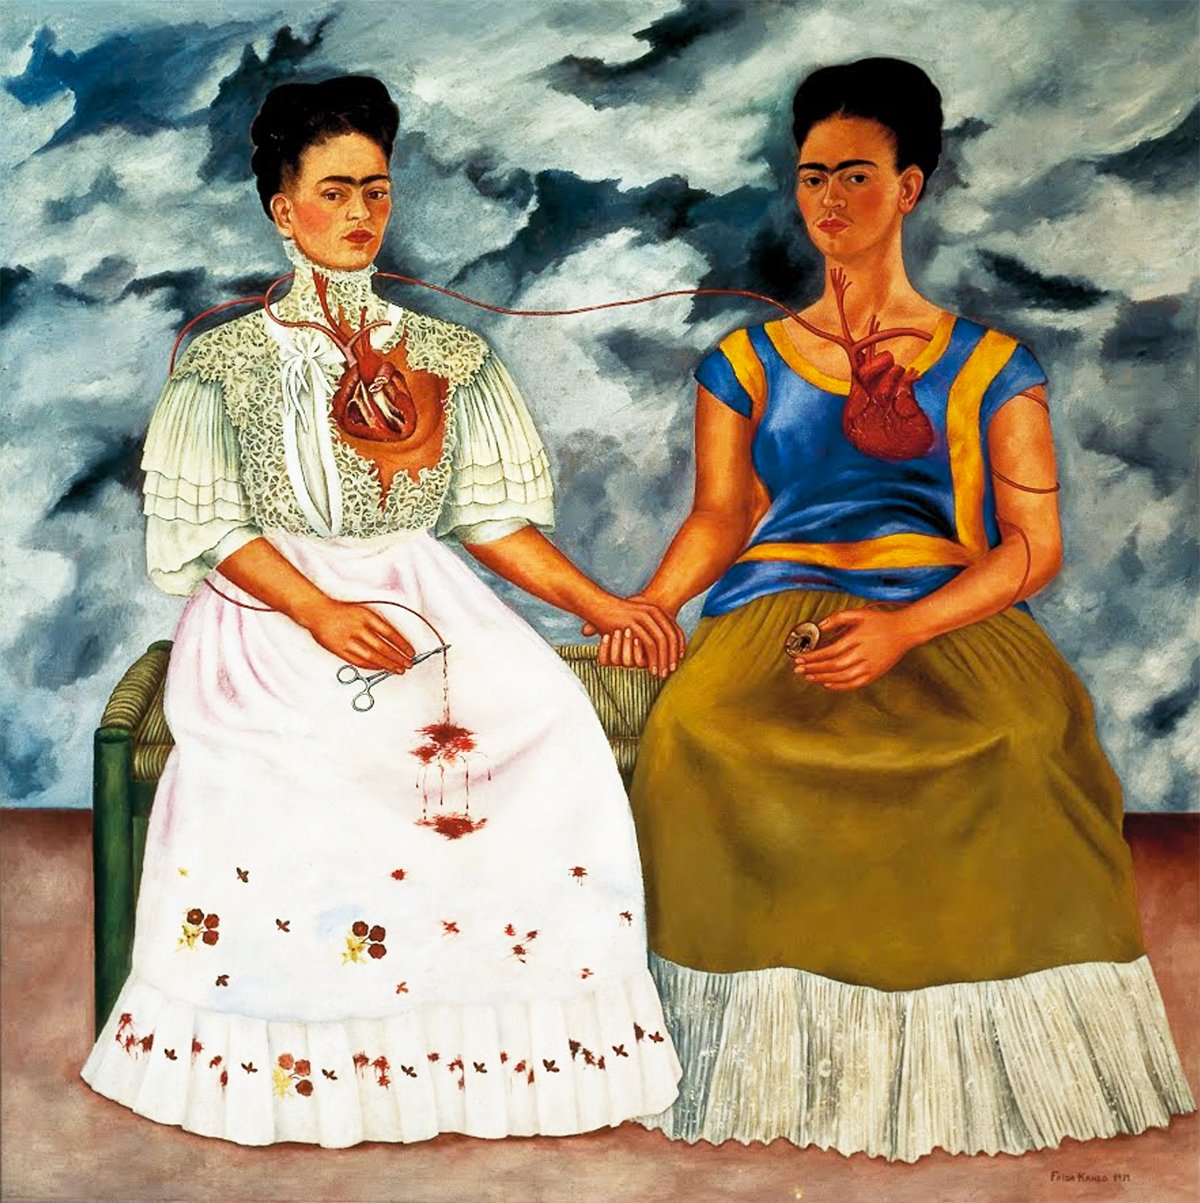 This image is a painting titled "The Two Fridas" by Frida Kahlo from 1939. It depicts two versions of the artist sitting side by side, with their hearts exposed and connected by a vein. The Frida on the left is dressed in a white European-style Victorian gown while the Frida on the right wears a traditional Mexican dress. The sky behind them is tumultuous, with swirling dark clouds, suggesting emotional turmoil. The exposed hearts and the blood vein, which one Frida cuts with scissors, symbolize the pain and divided identity experienced by the artist.